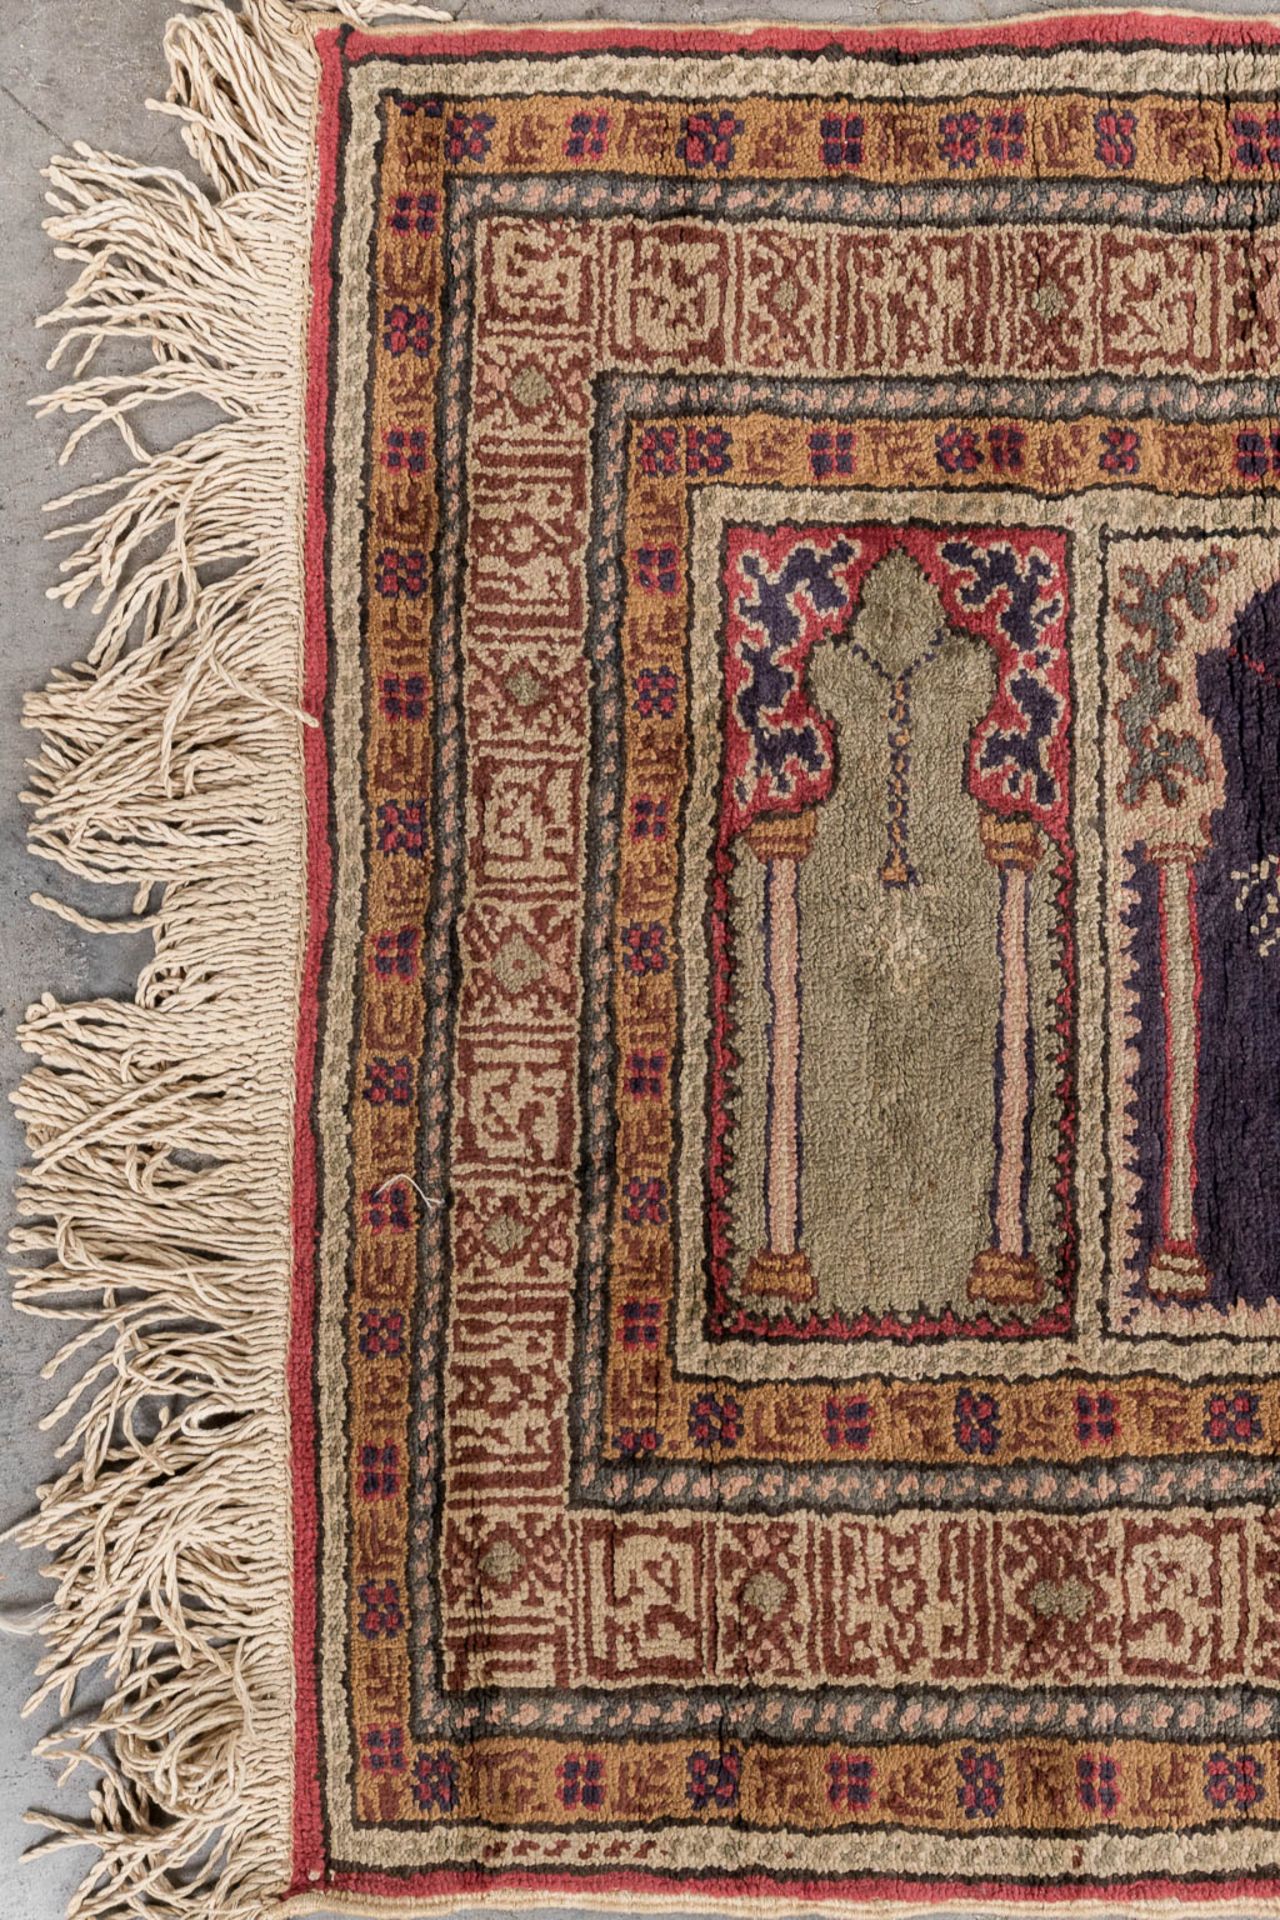 A collection of 2 Oriental hand-made carpets. Persia. (L: 220 x W: 134 cm) - Image 4 of 10